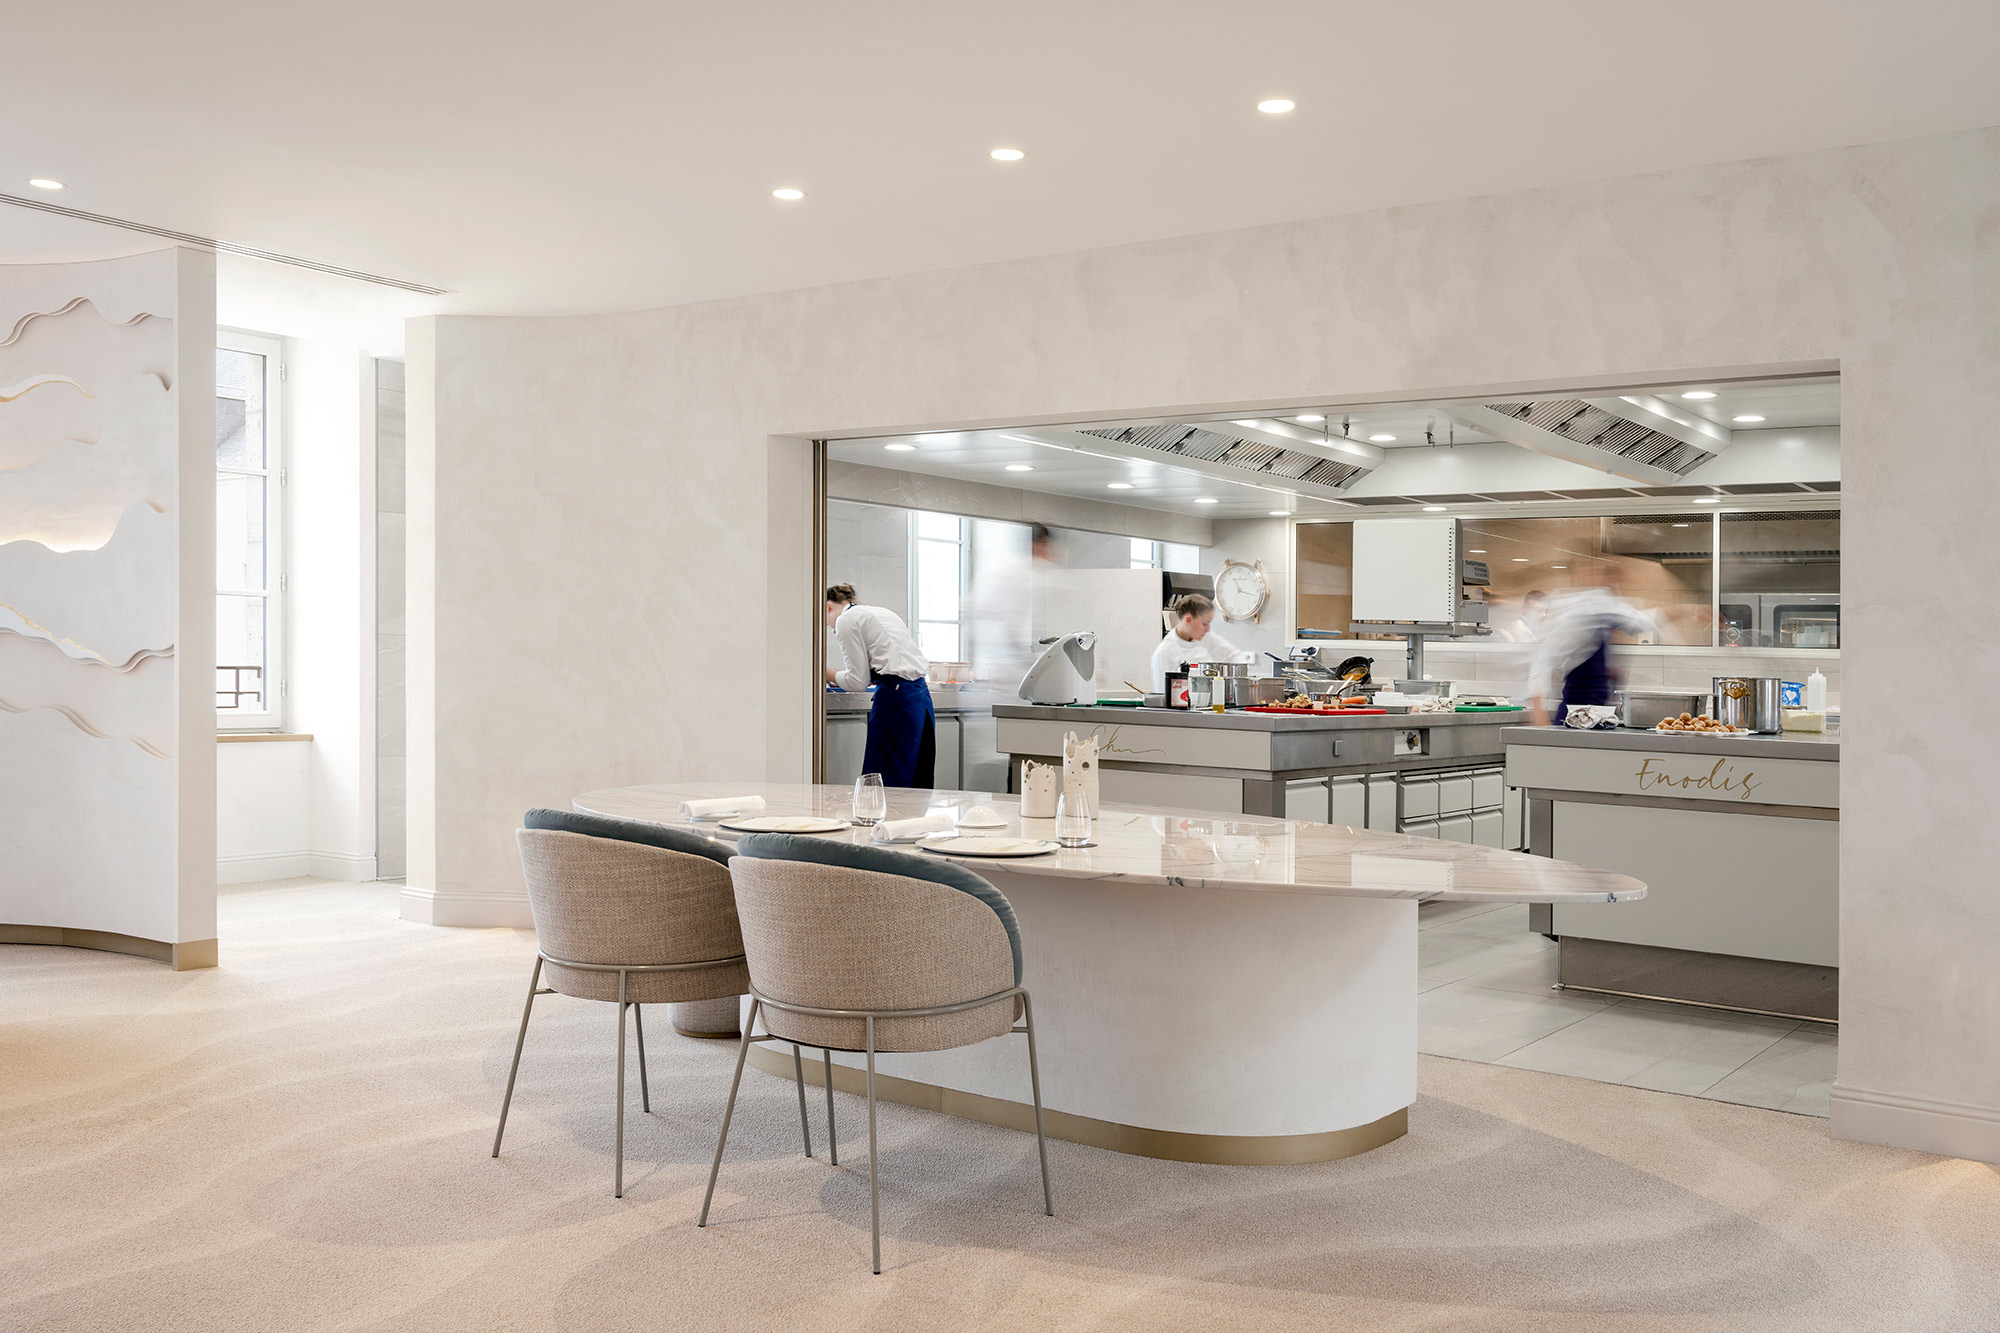 Image of Hotel Fleur de Loire 11 in The sophistication and strength of Cosentino brands for award-winning chef Christophe Hay’s new 5-star hotel  - Cosentino